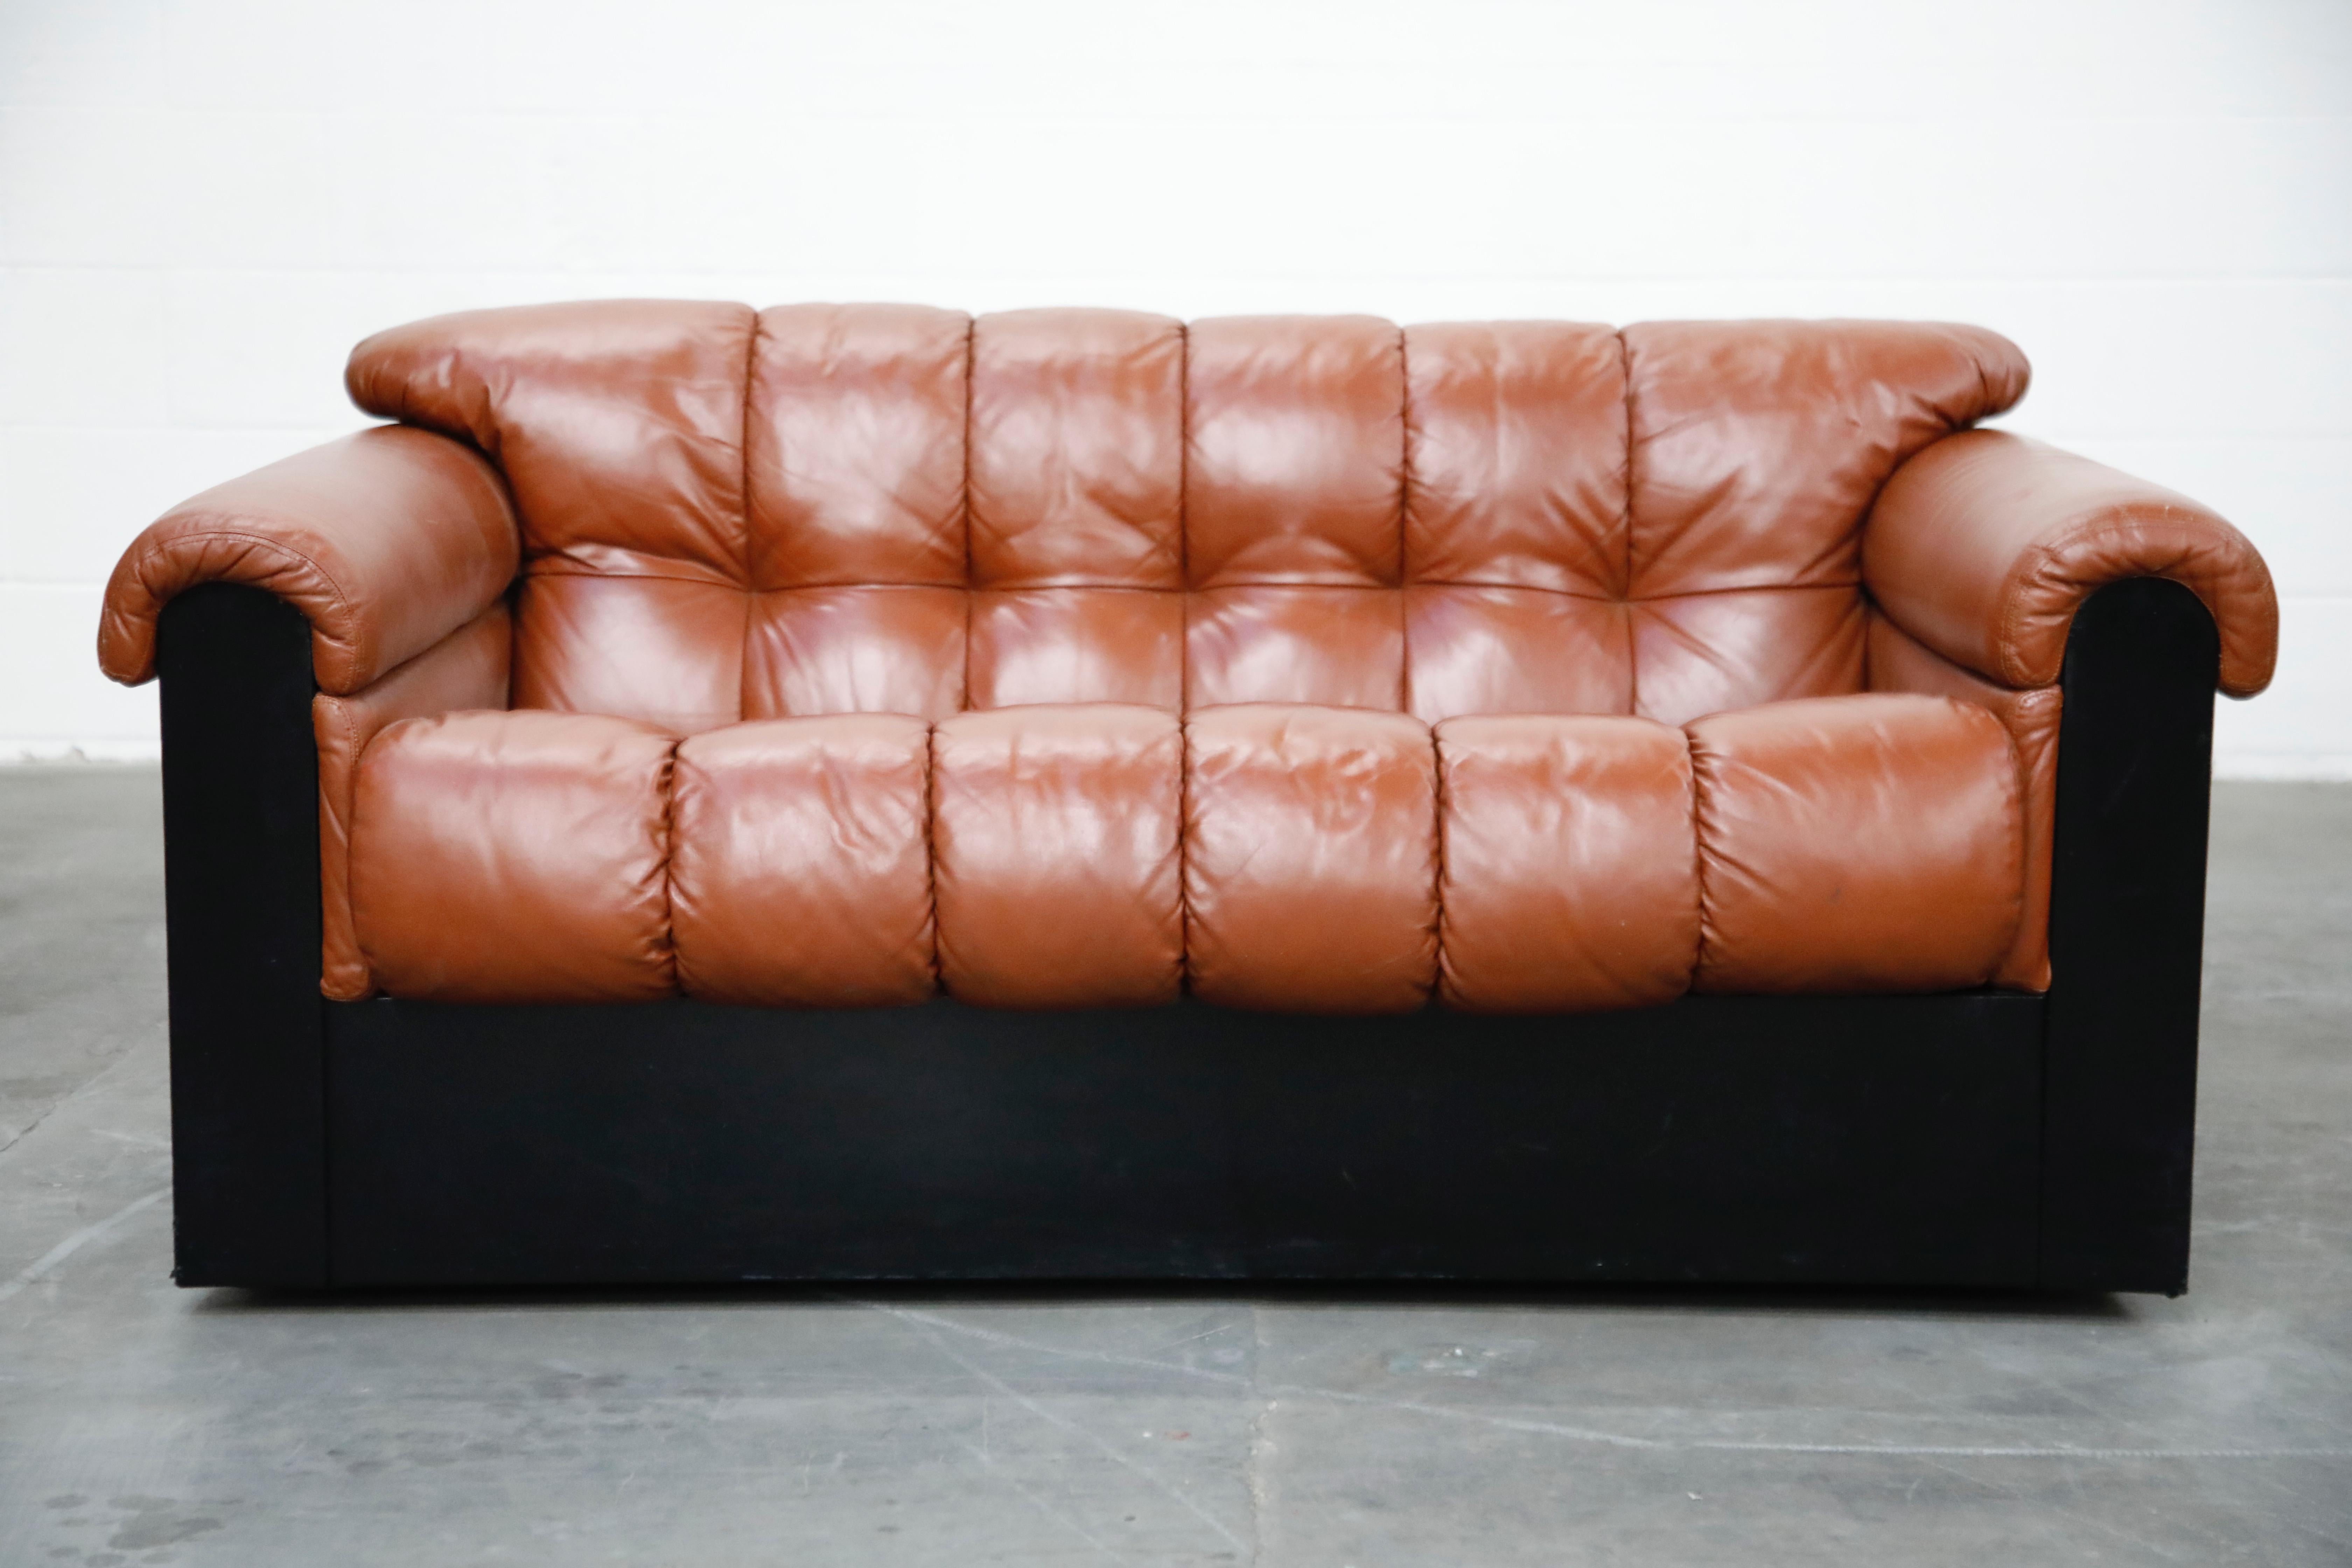 A lovely example of the 'Bounty' series by The Pace Collection in the early 1980s, this deep seated tufted leather loveseat was designed by L. Davantazi and produced by Elam for Pace. 

This tufted settee retains its original supple cognac leather